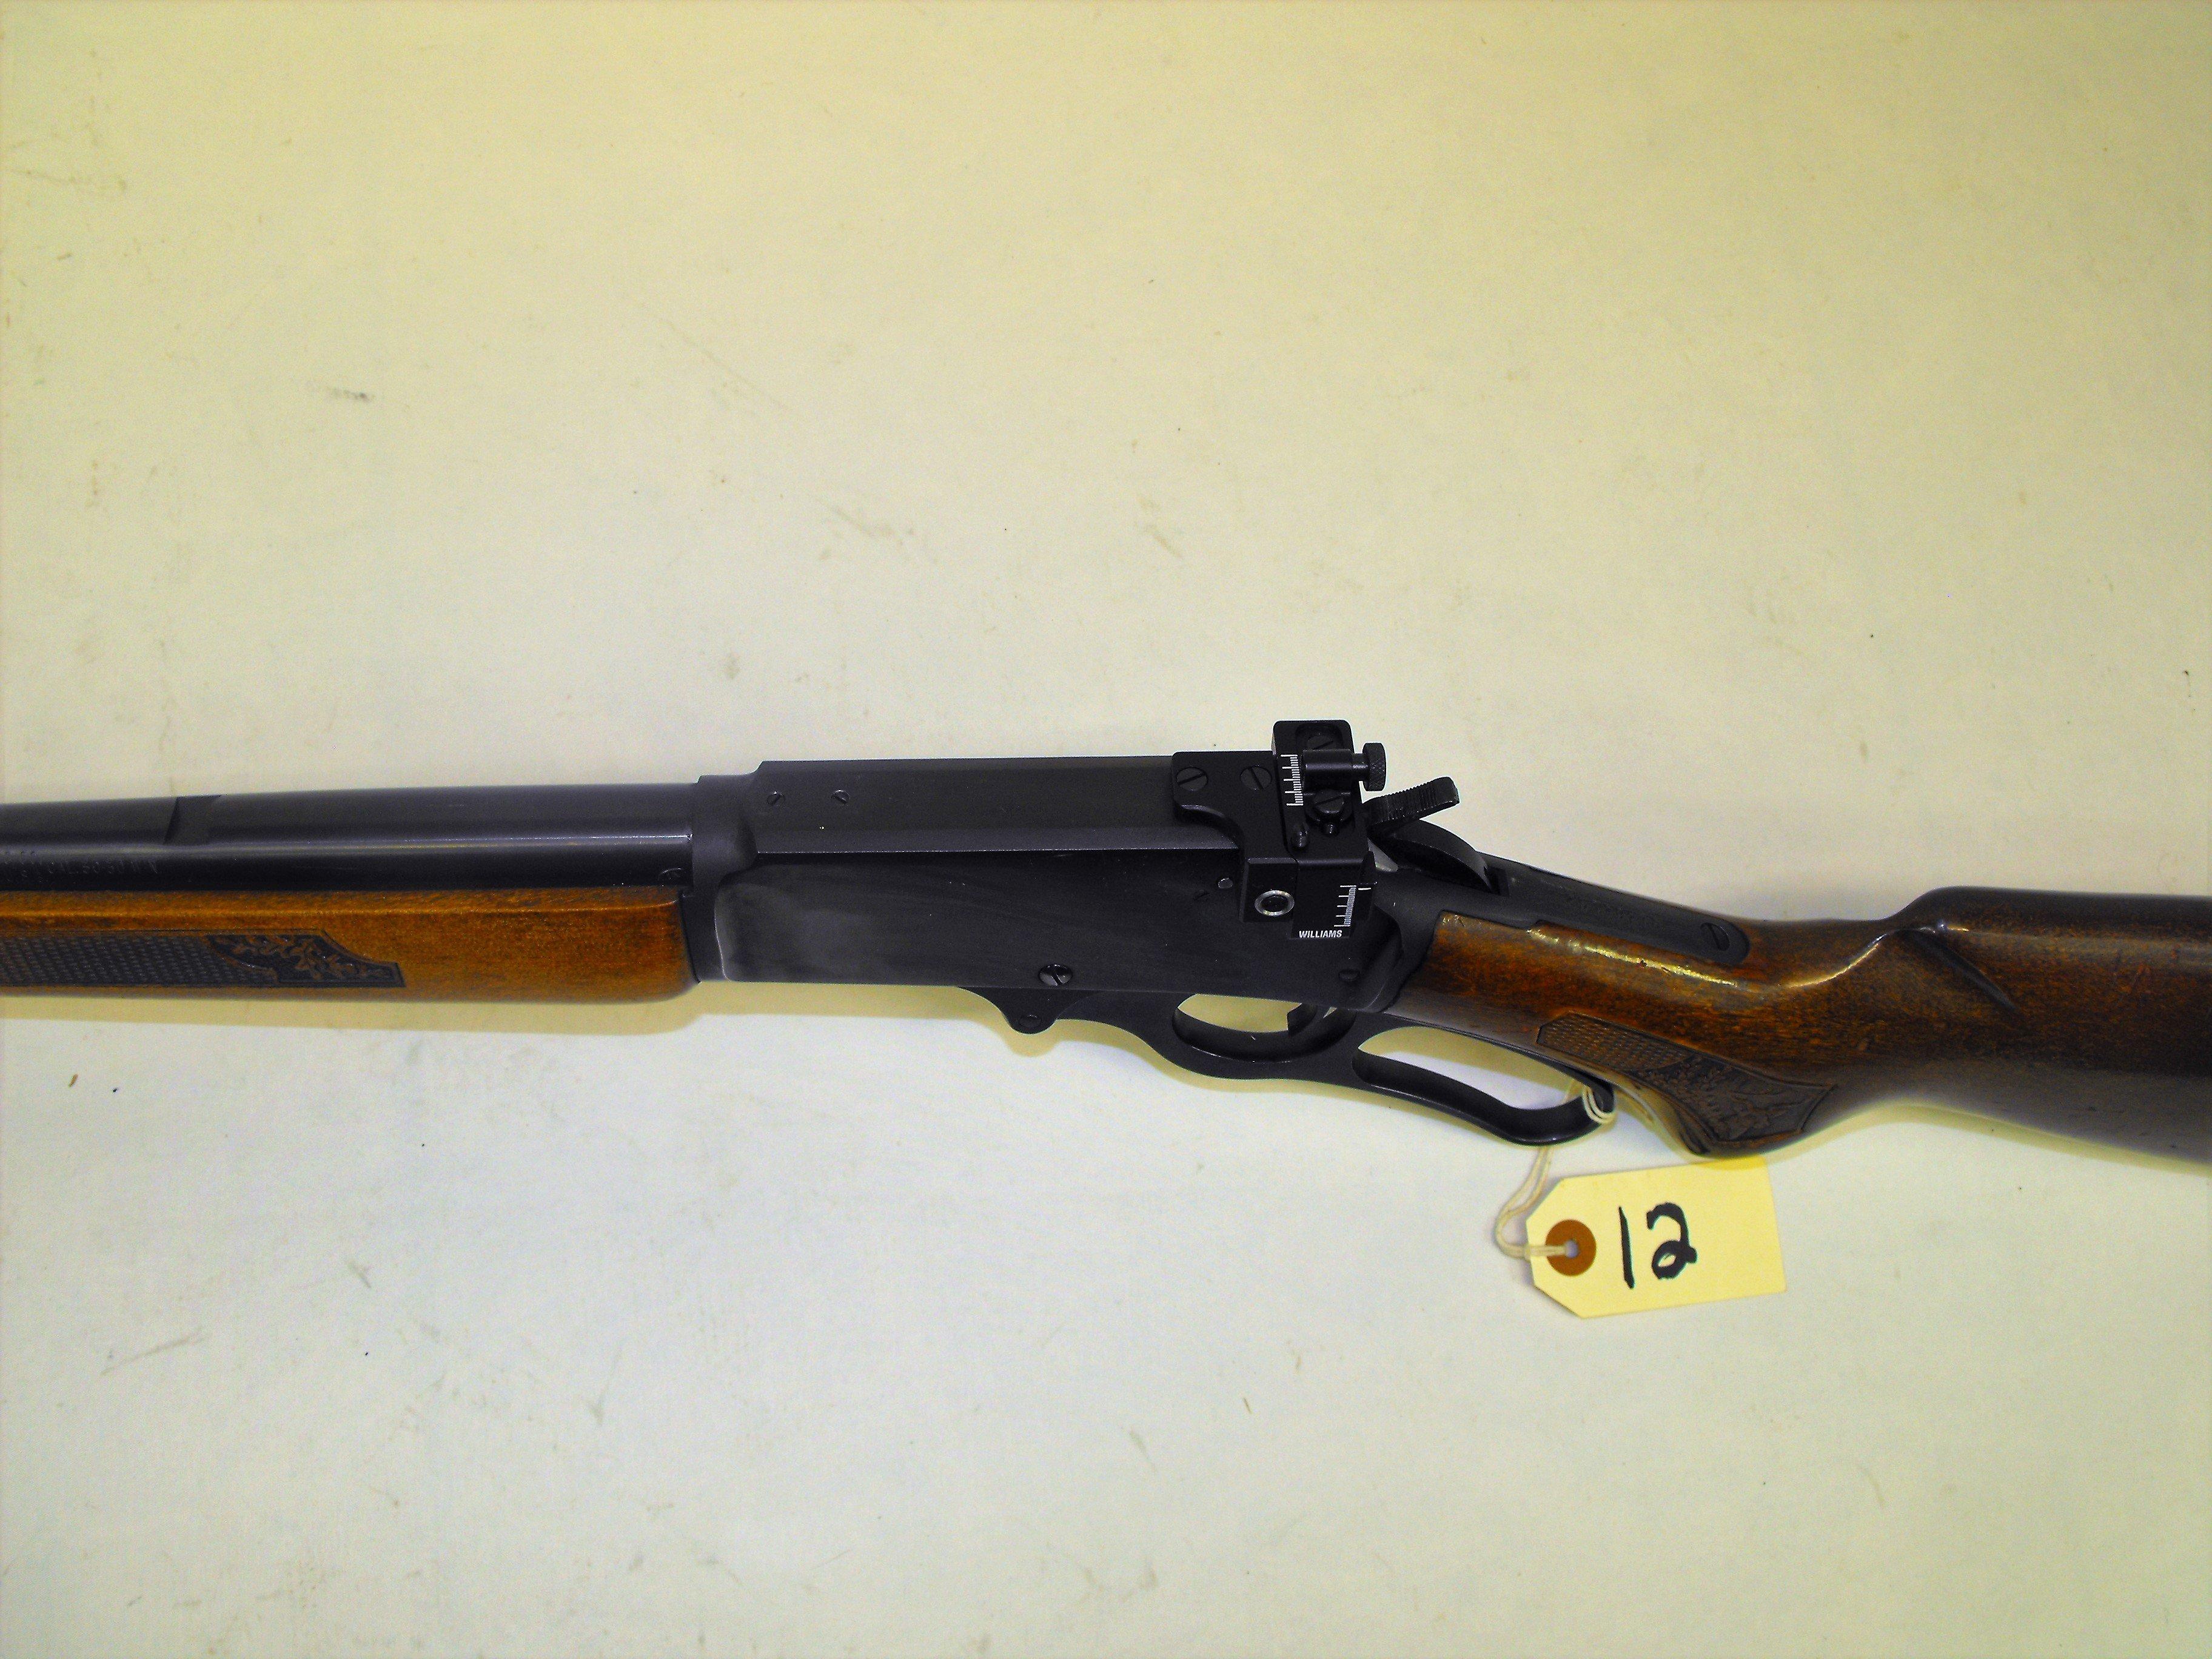 (R) MARLIN GLENFIELD 30A 30.30 LEVER ACTION